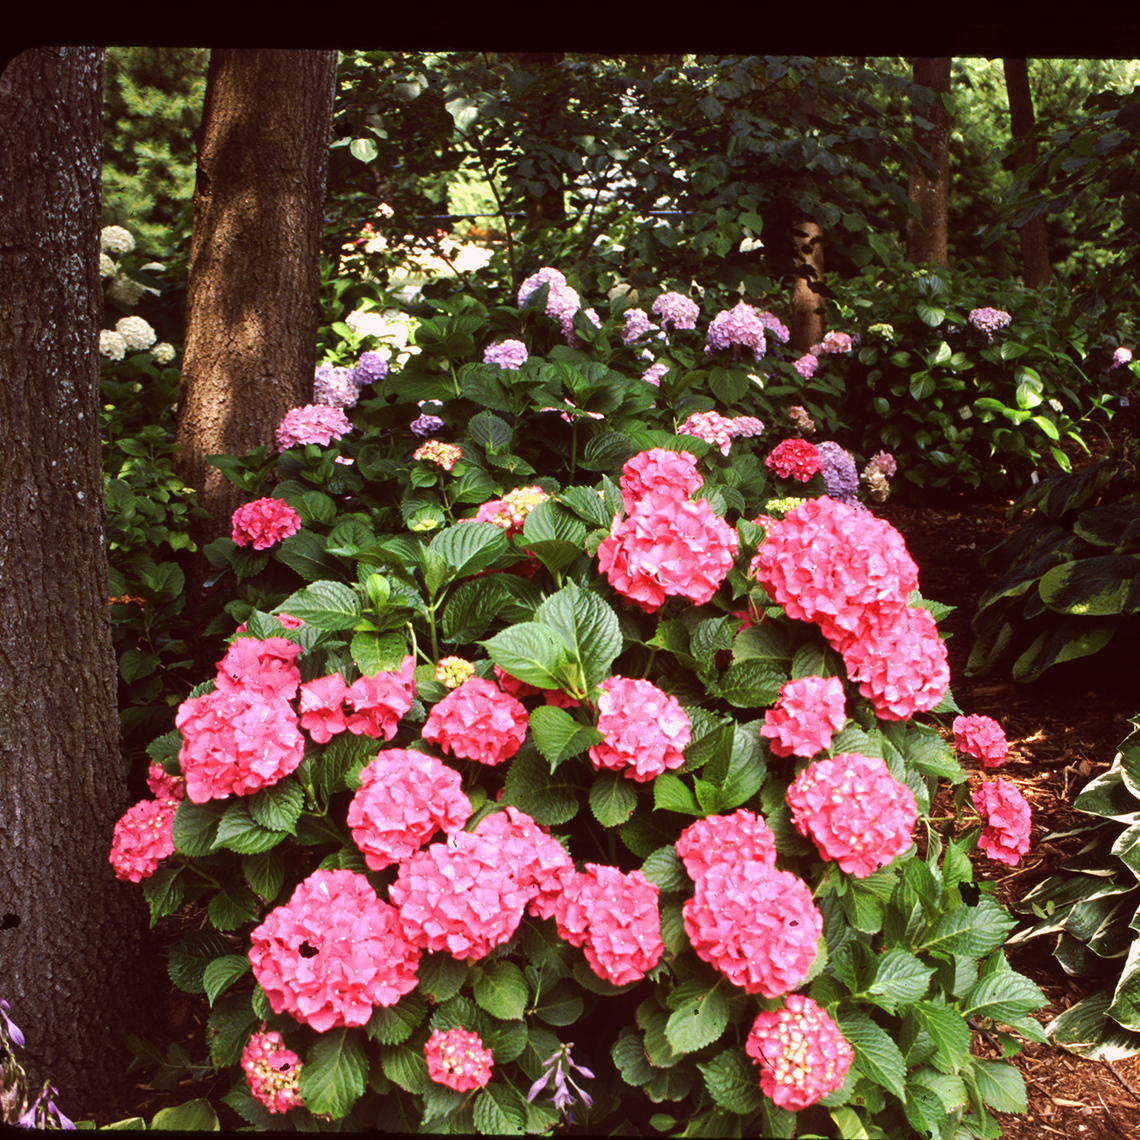 A specimen of Glowing Embers hydrangea blooming with pink flowers in a wooded garden